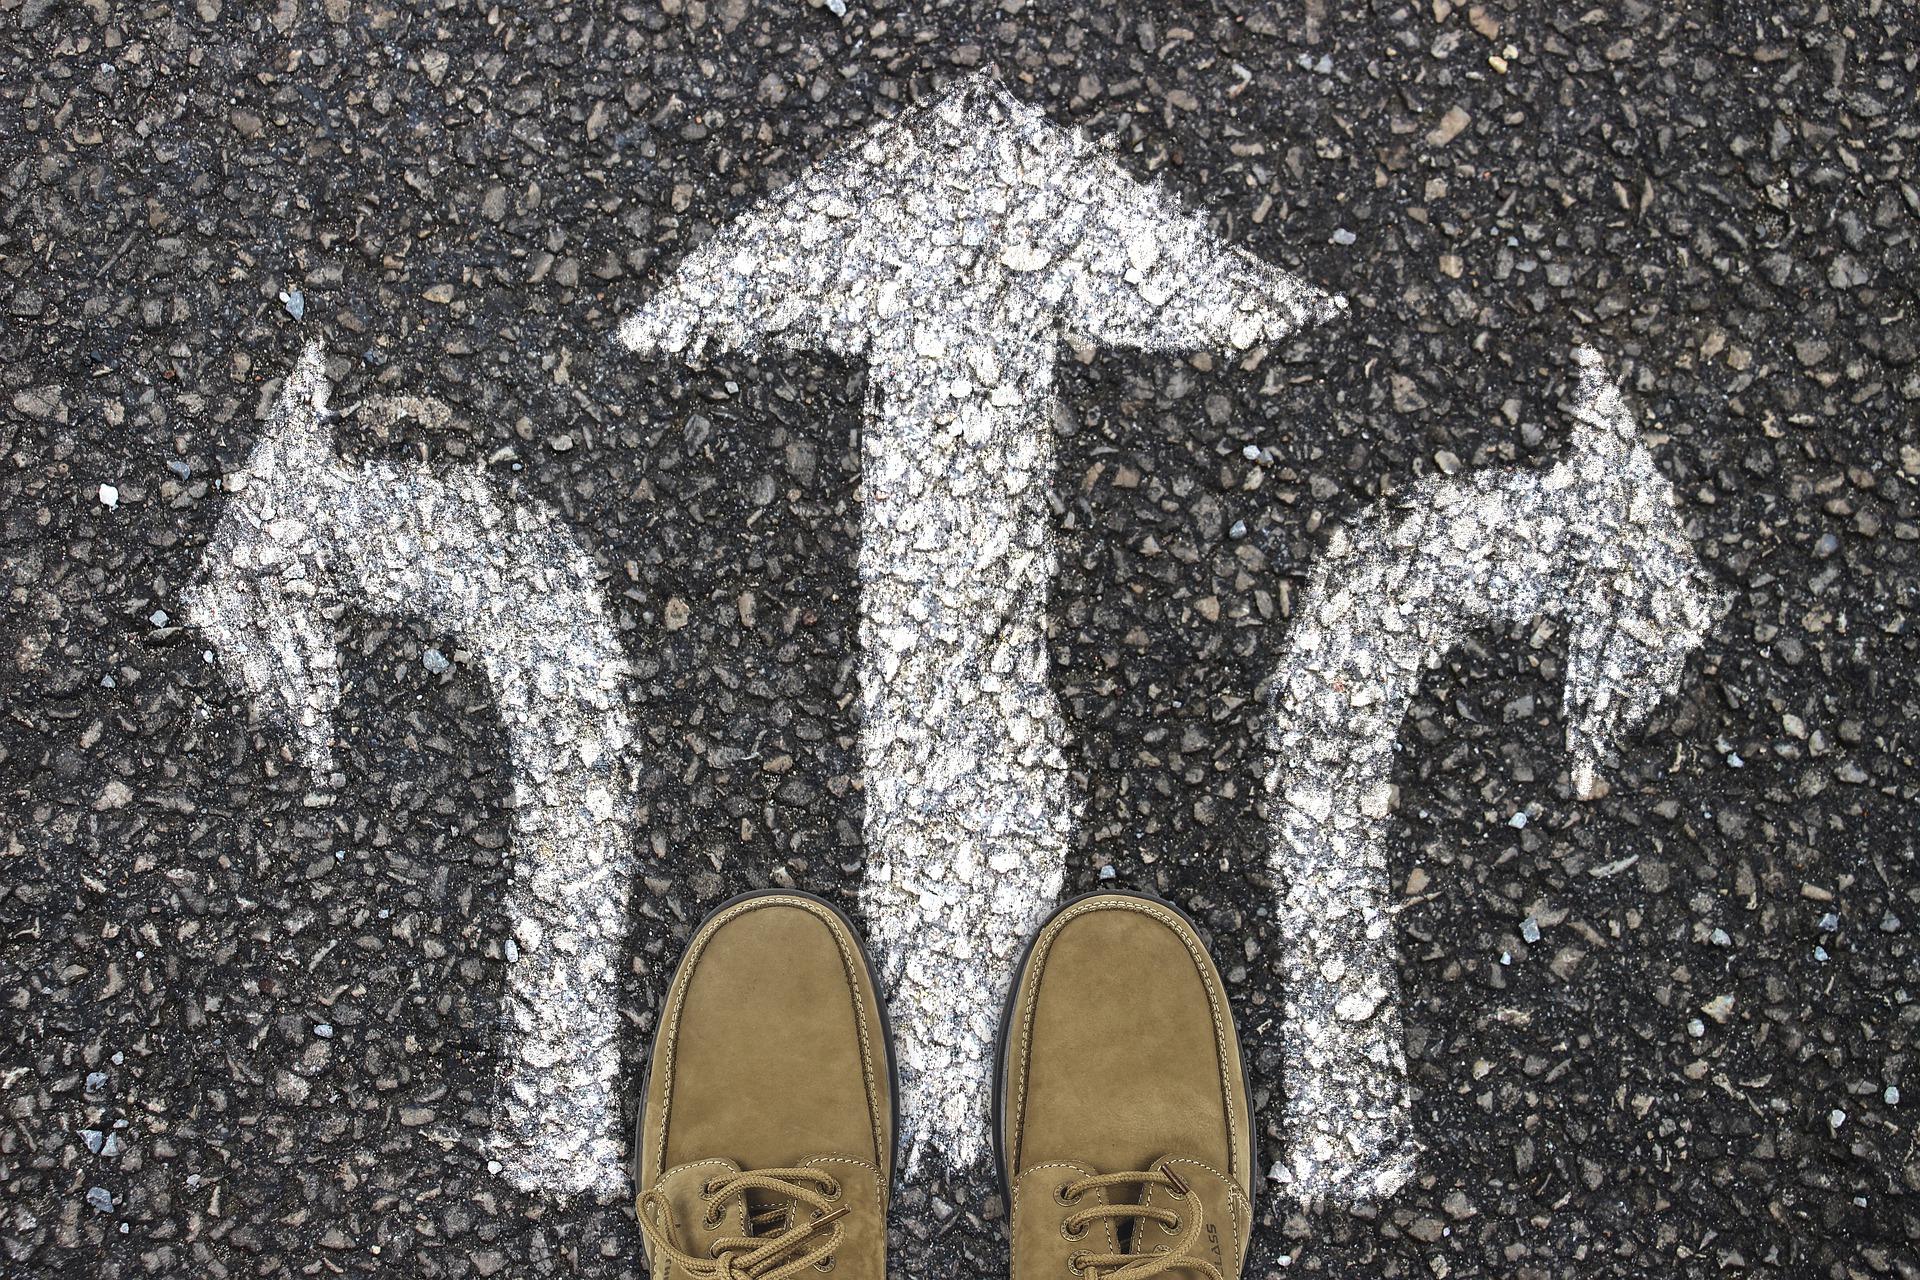  Shoes and three arrows (going left, straight, and right).